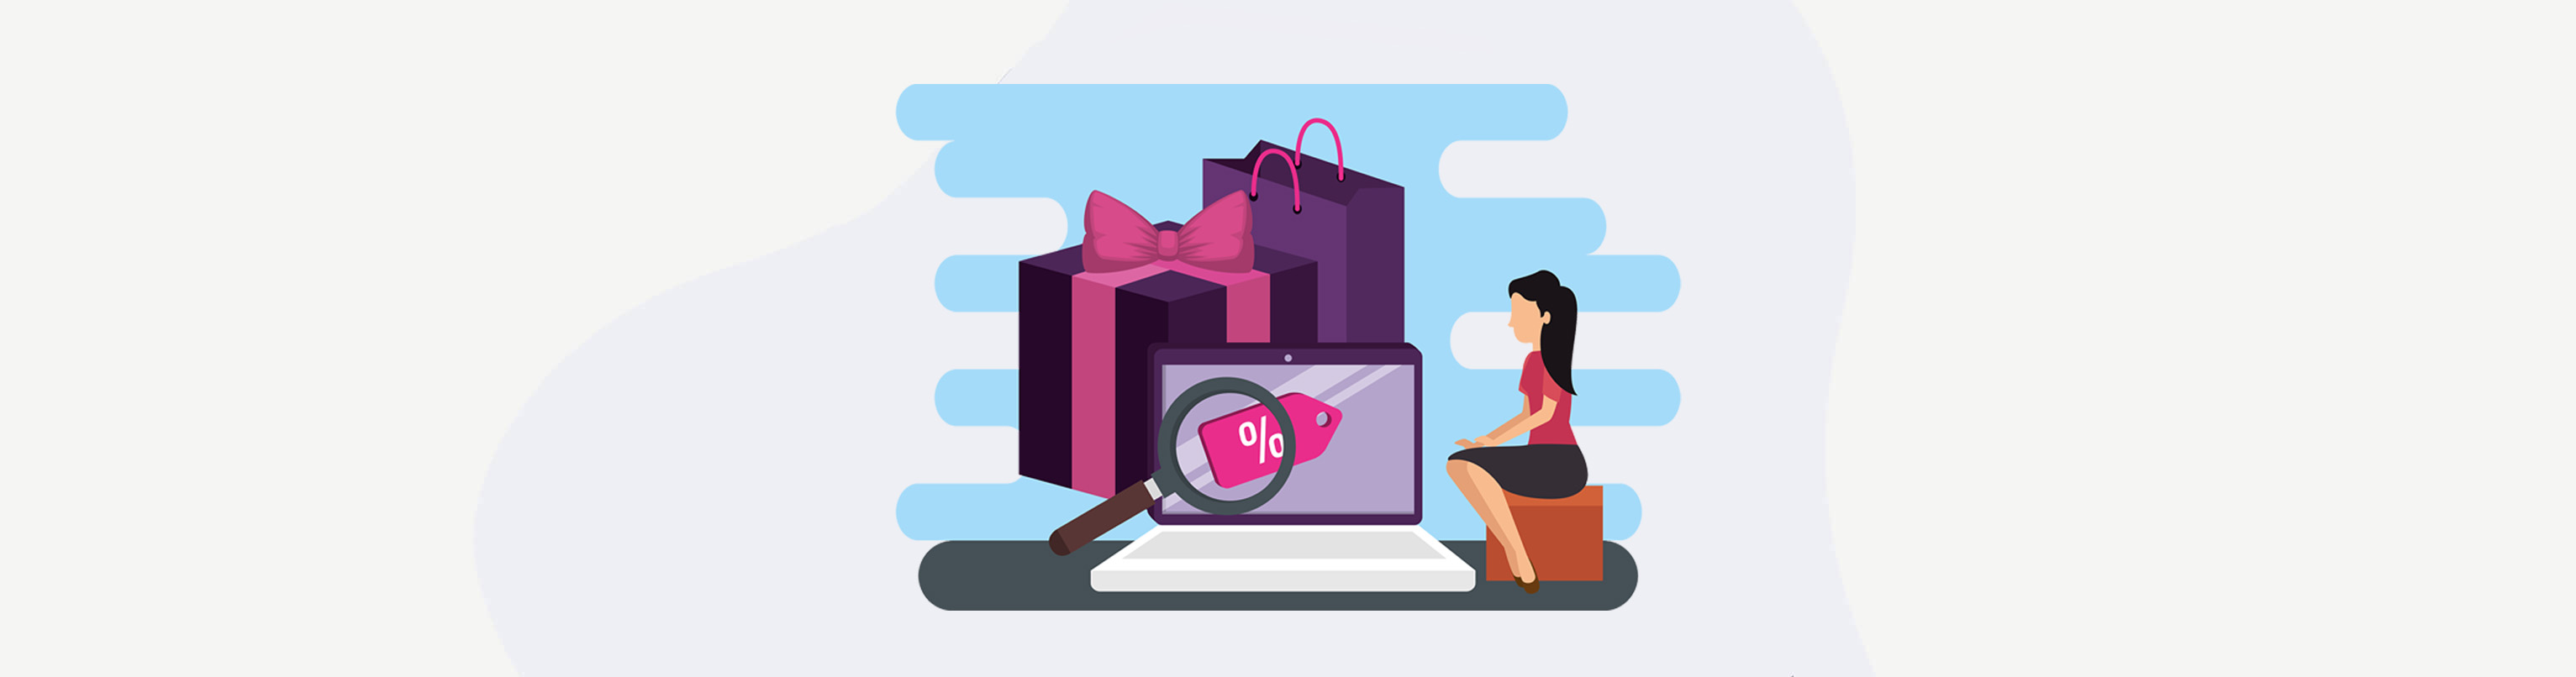 How to find your eCommerce store's Target market